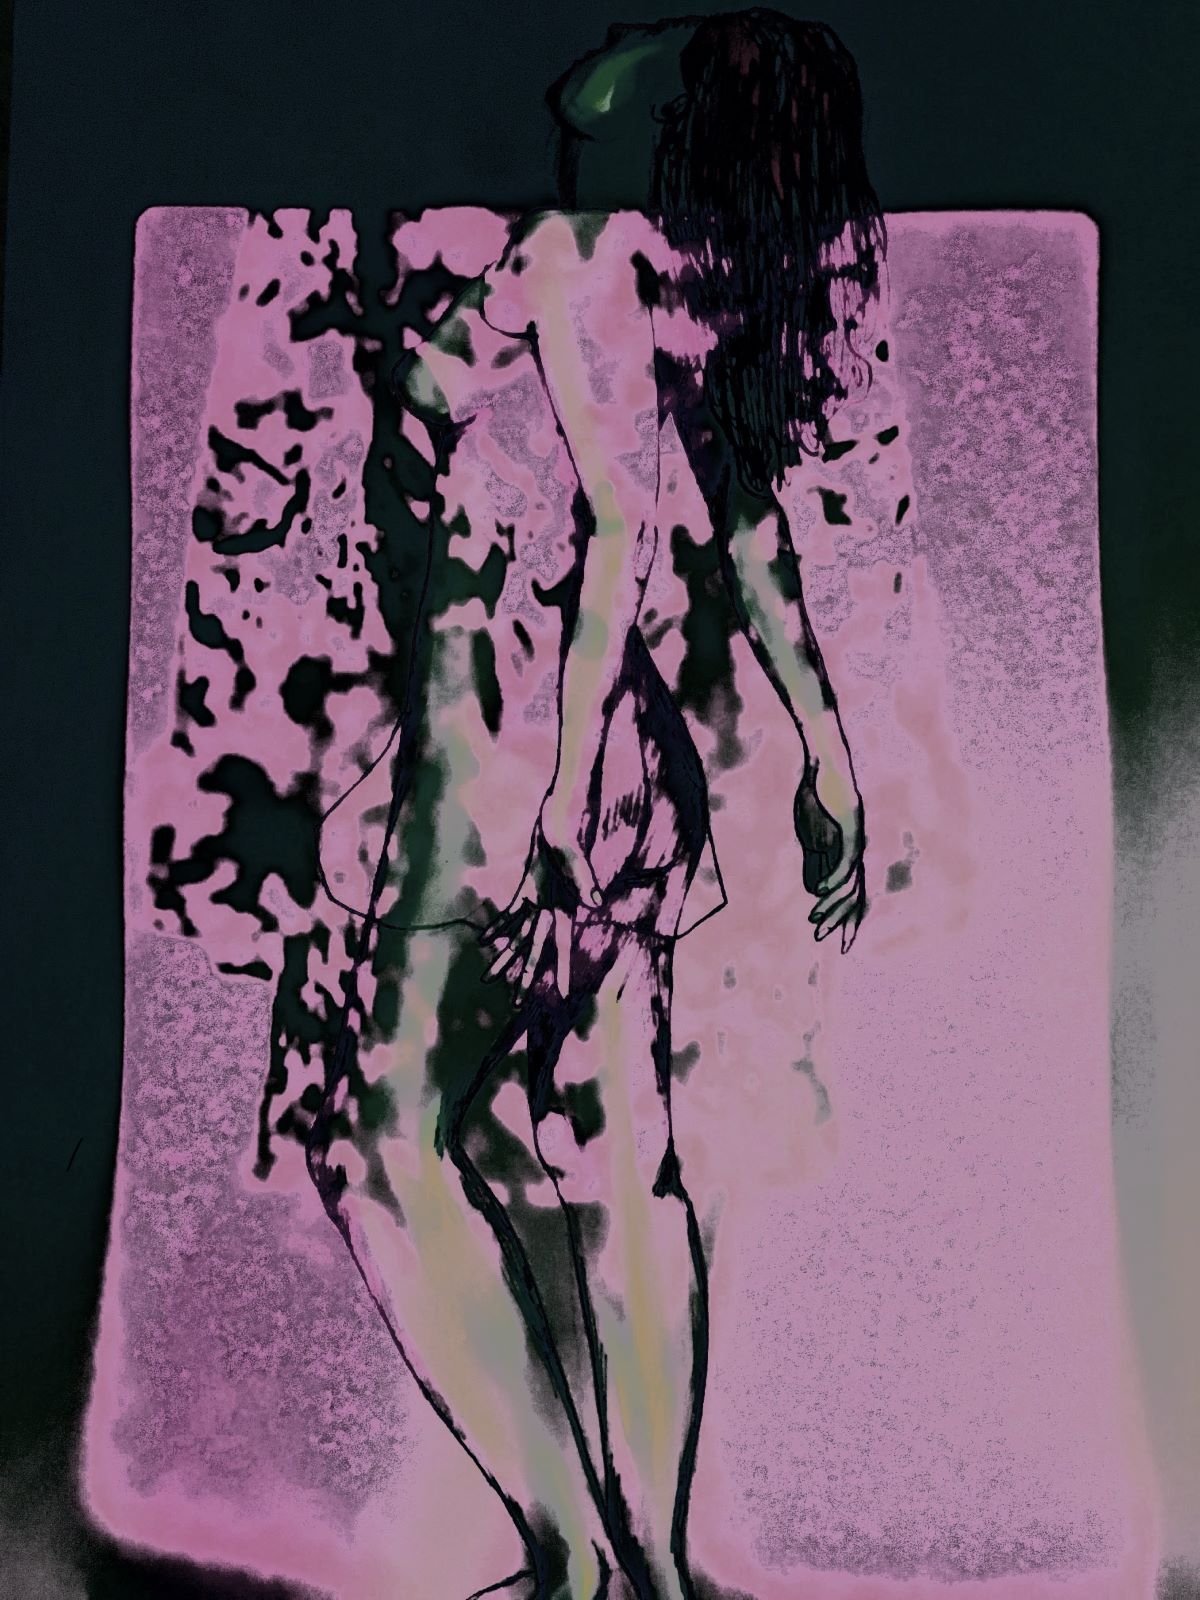 drawing of a nude woman facing a purple screen with abstract print on it